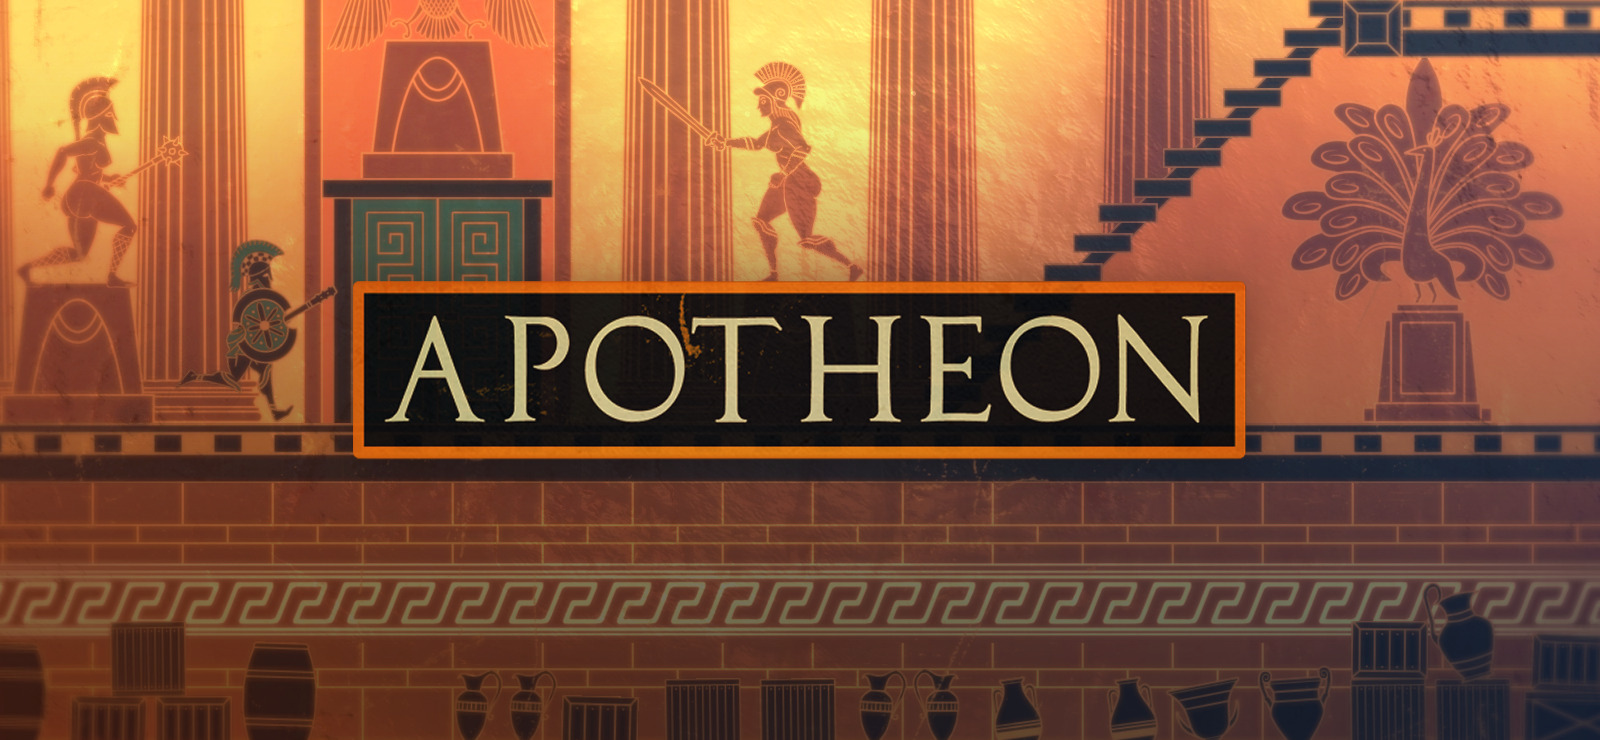 Apotheon wallpapers for desktop, download free Apotheon pictures and  backgrounds for PC | mob.org